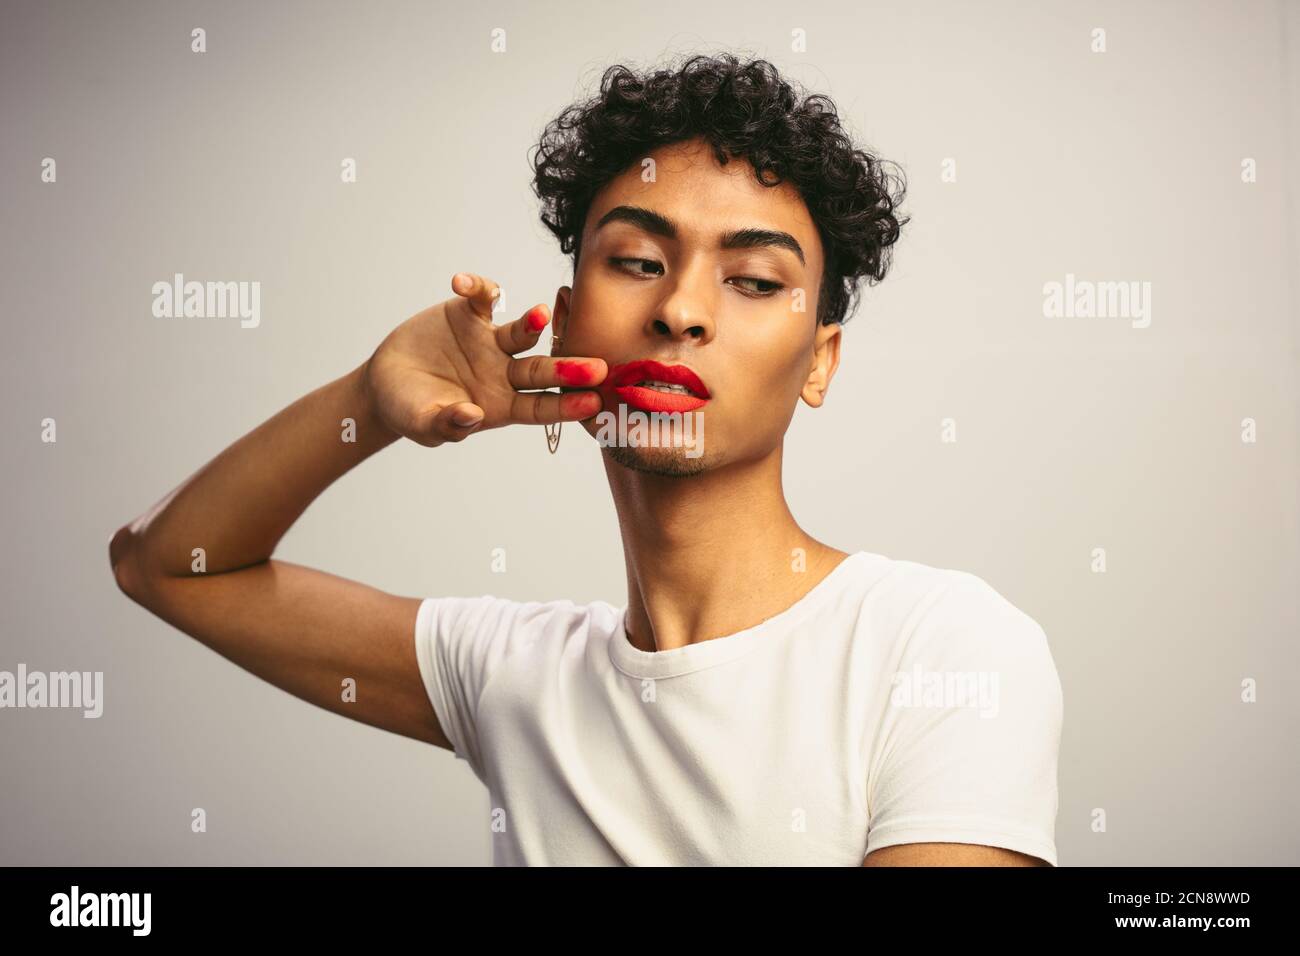 Transgender male smudging his lipstick. Young man smearing lipstick on his face against white background. Stock Photo